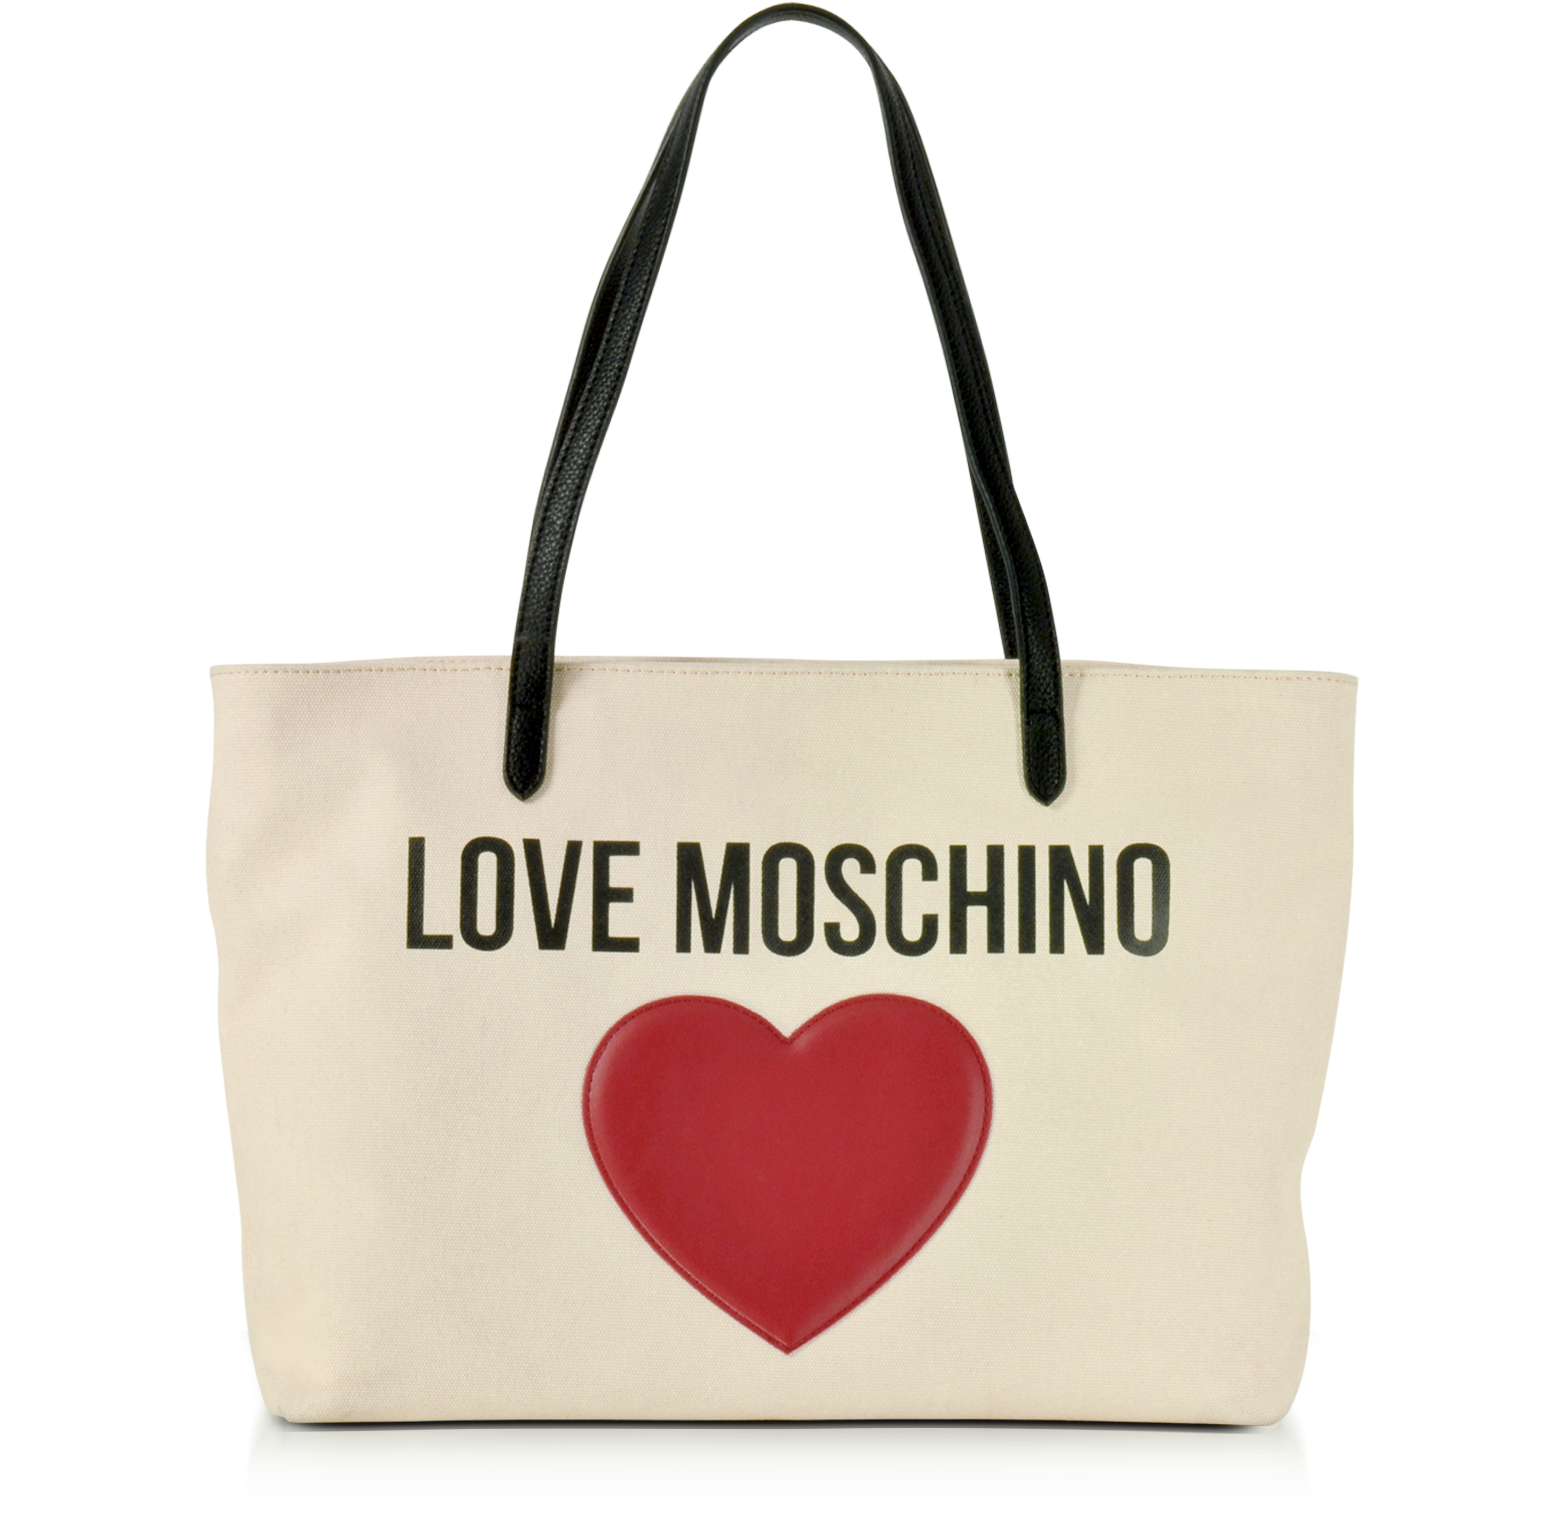 Love Moschino Tote Bag on Sale, 53% OFF | www.rupit.com